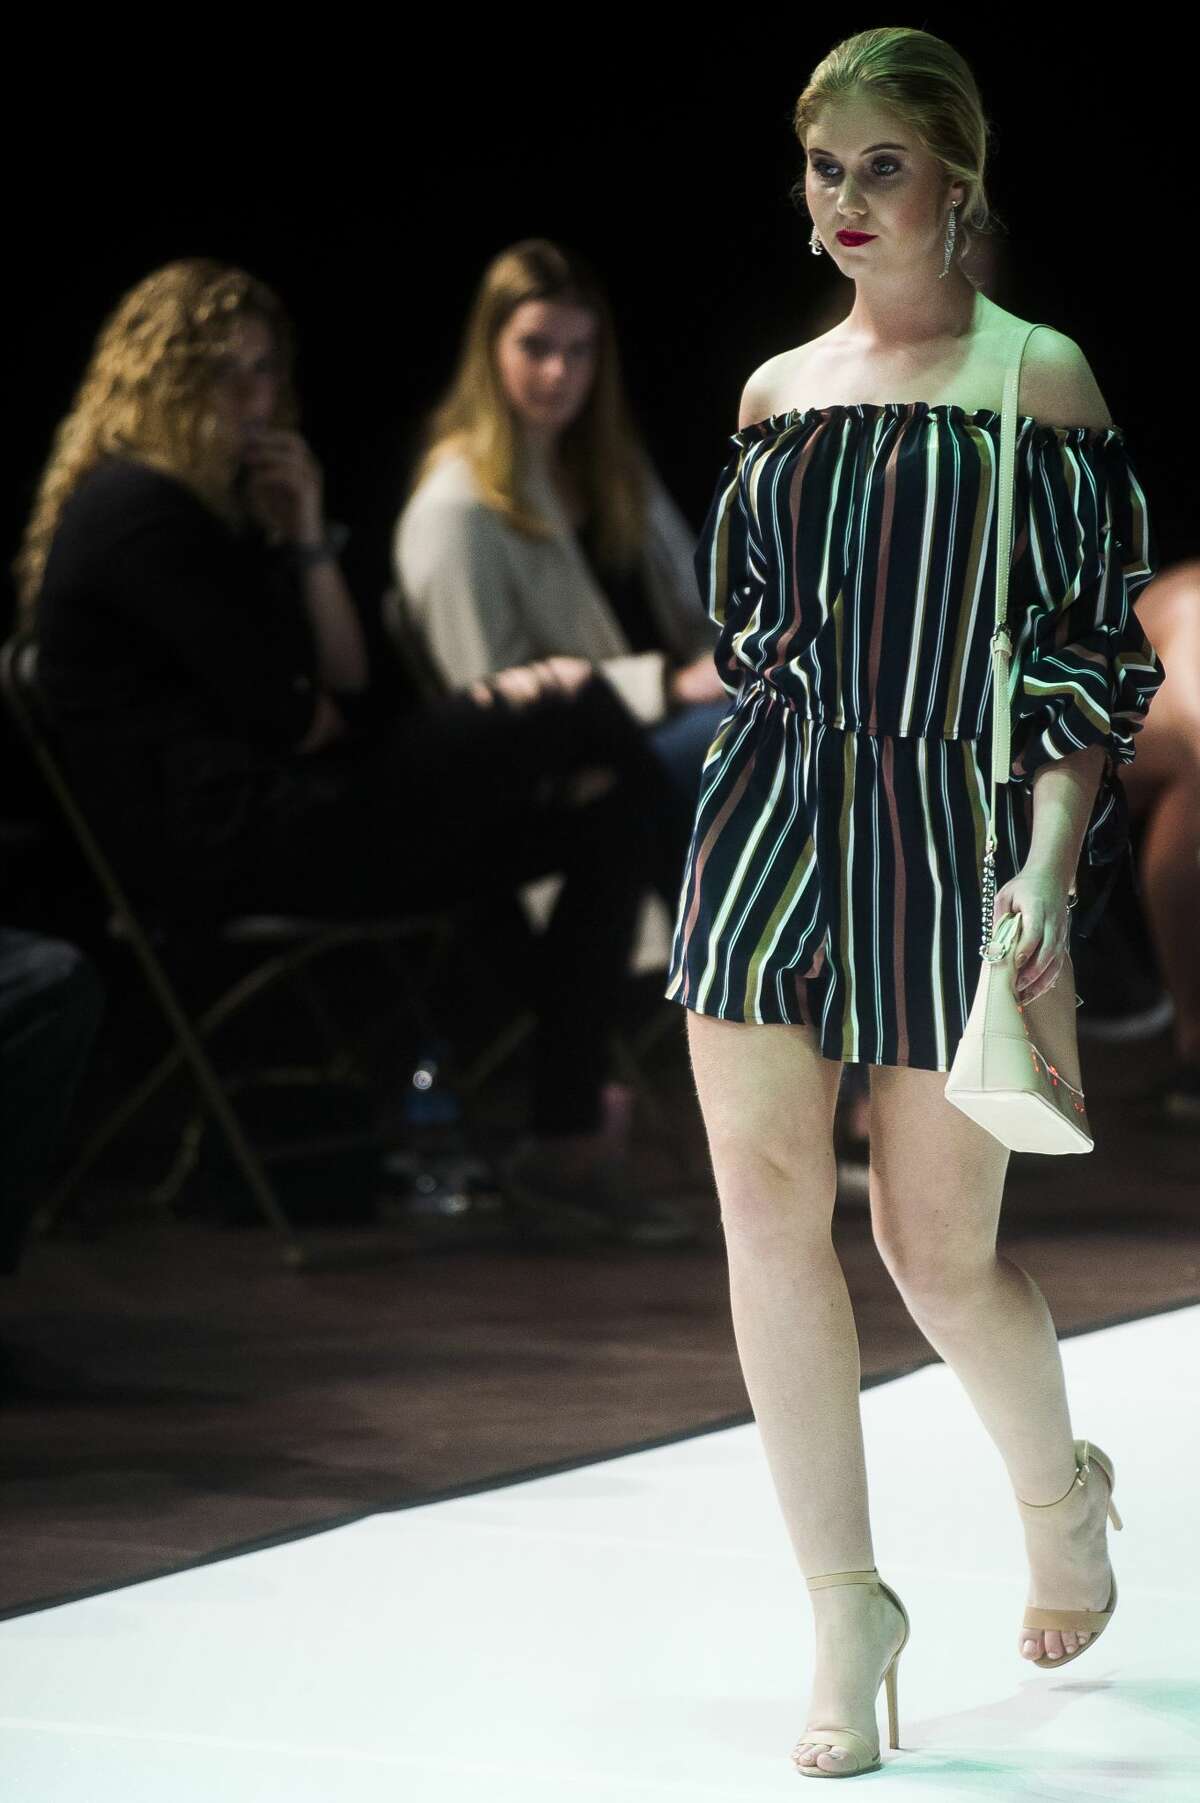 A model walks the runway during Northwood University's 17th annual Style Show on Friday, April 13, 2018 at Northwood. (Katy Kildee/kkildee@mdn.net)